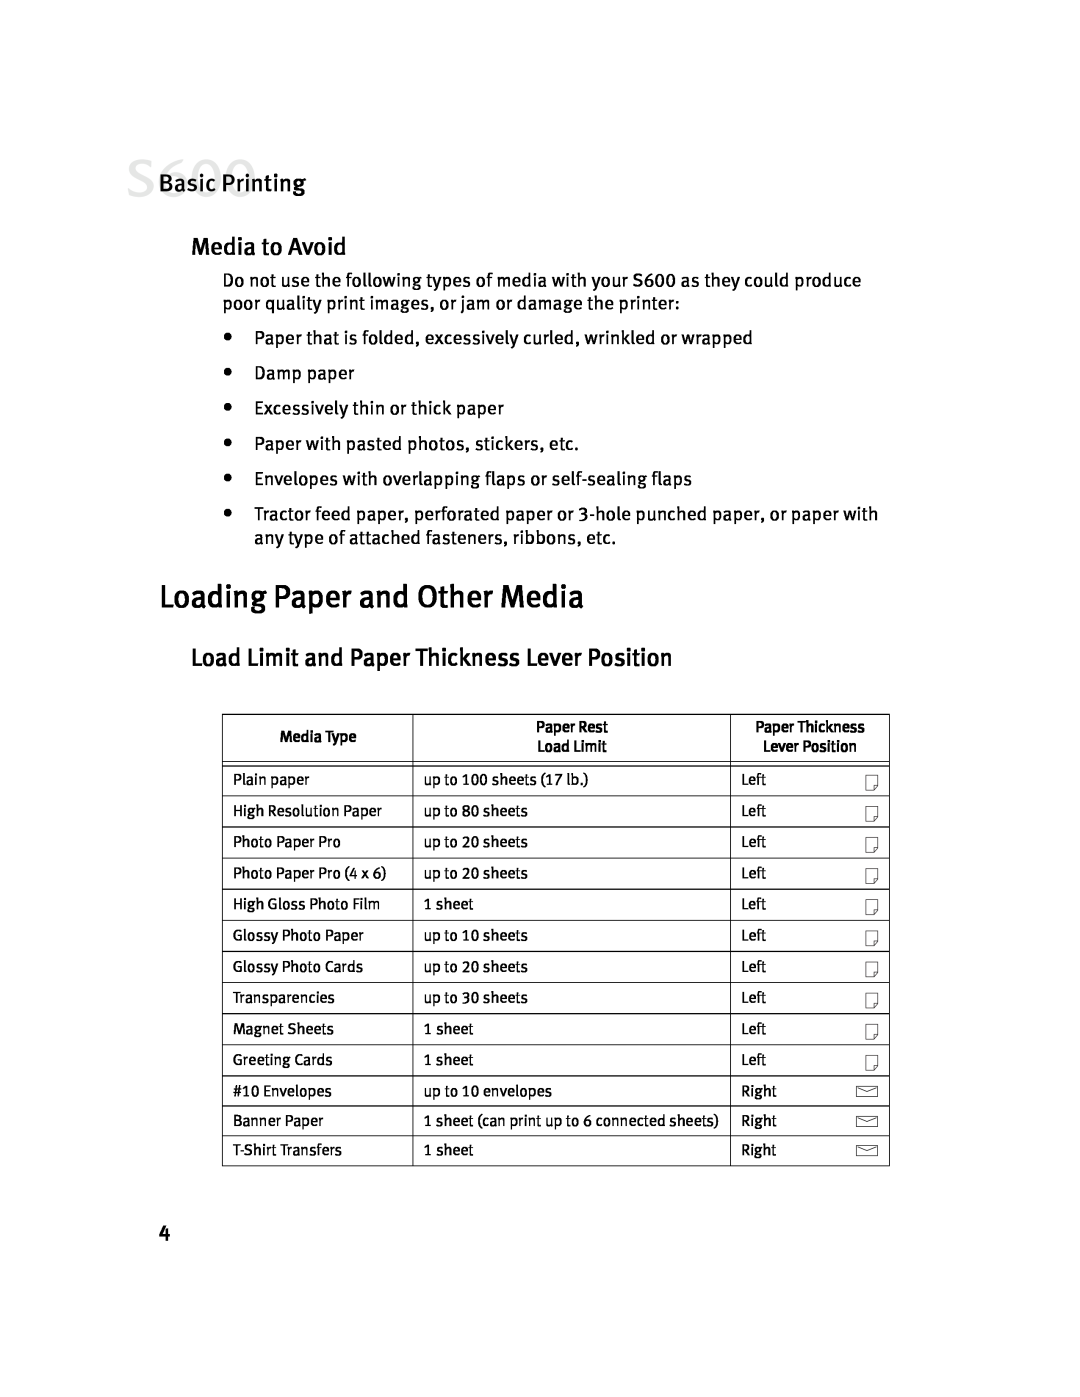 Canon S600 Loading Paper and Other Media, Media to Avoid, Load Limit and Paper Thickness Lever Position, Basic Printing 